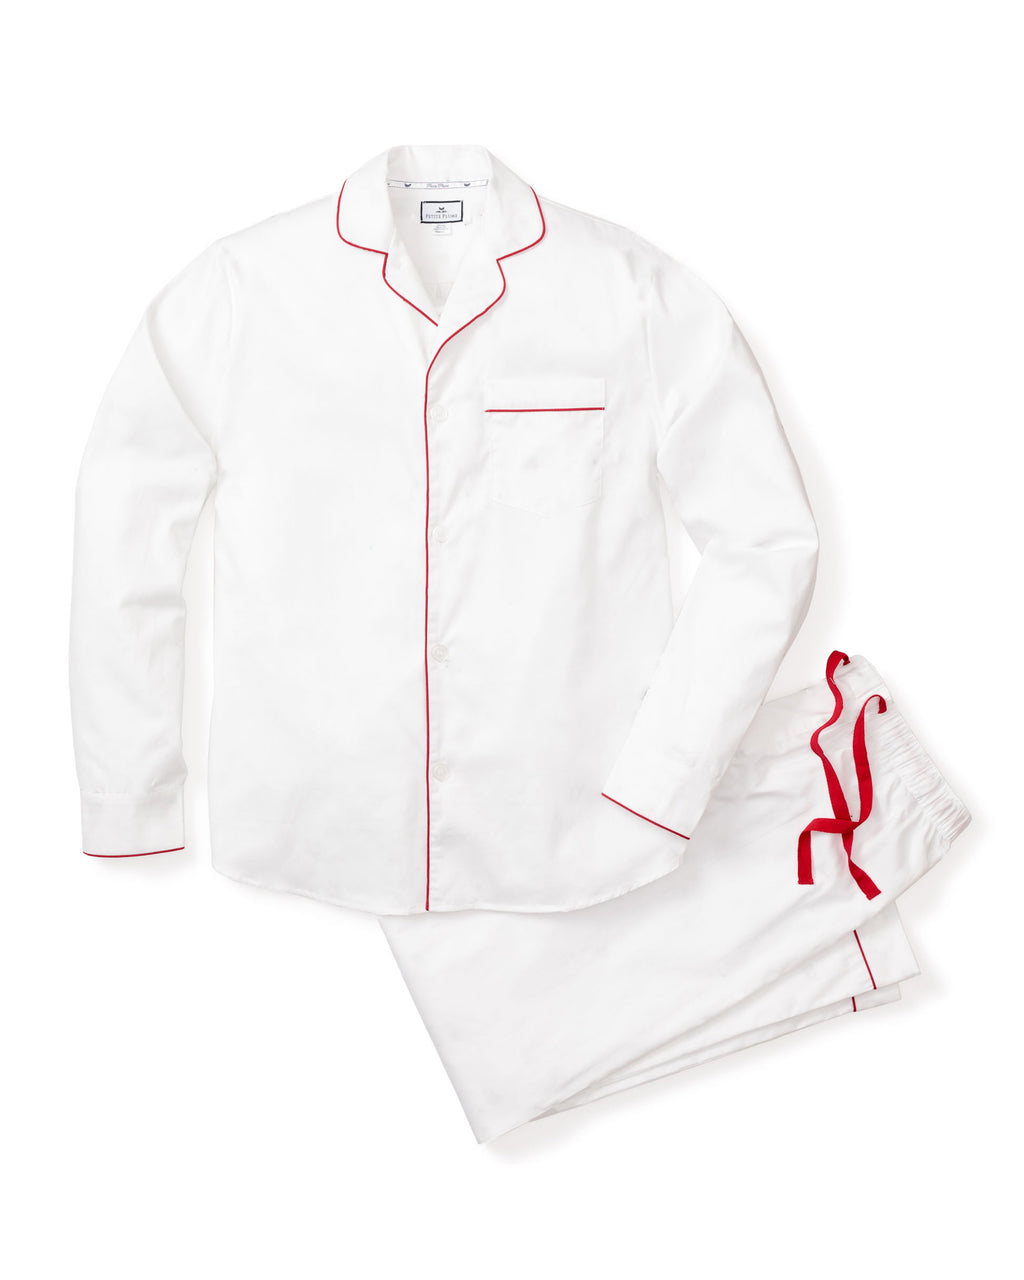 Men's Twill Pajama Set in White with Red Piping – Petite Plume